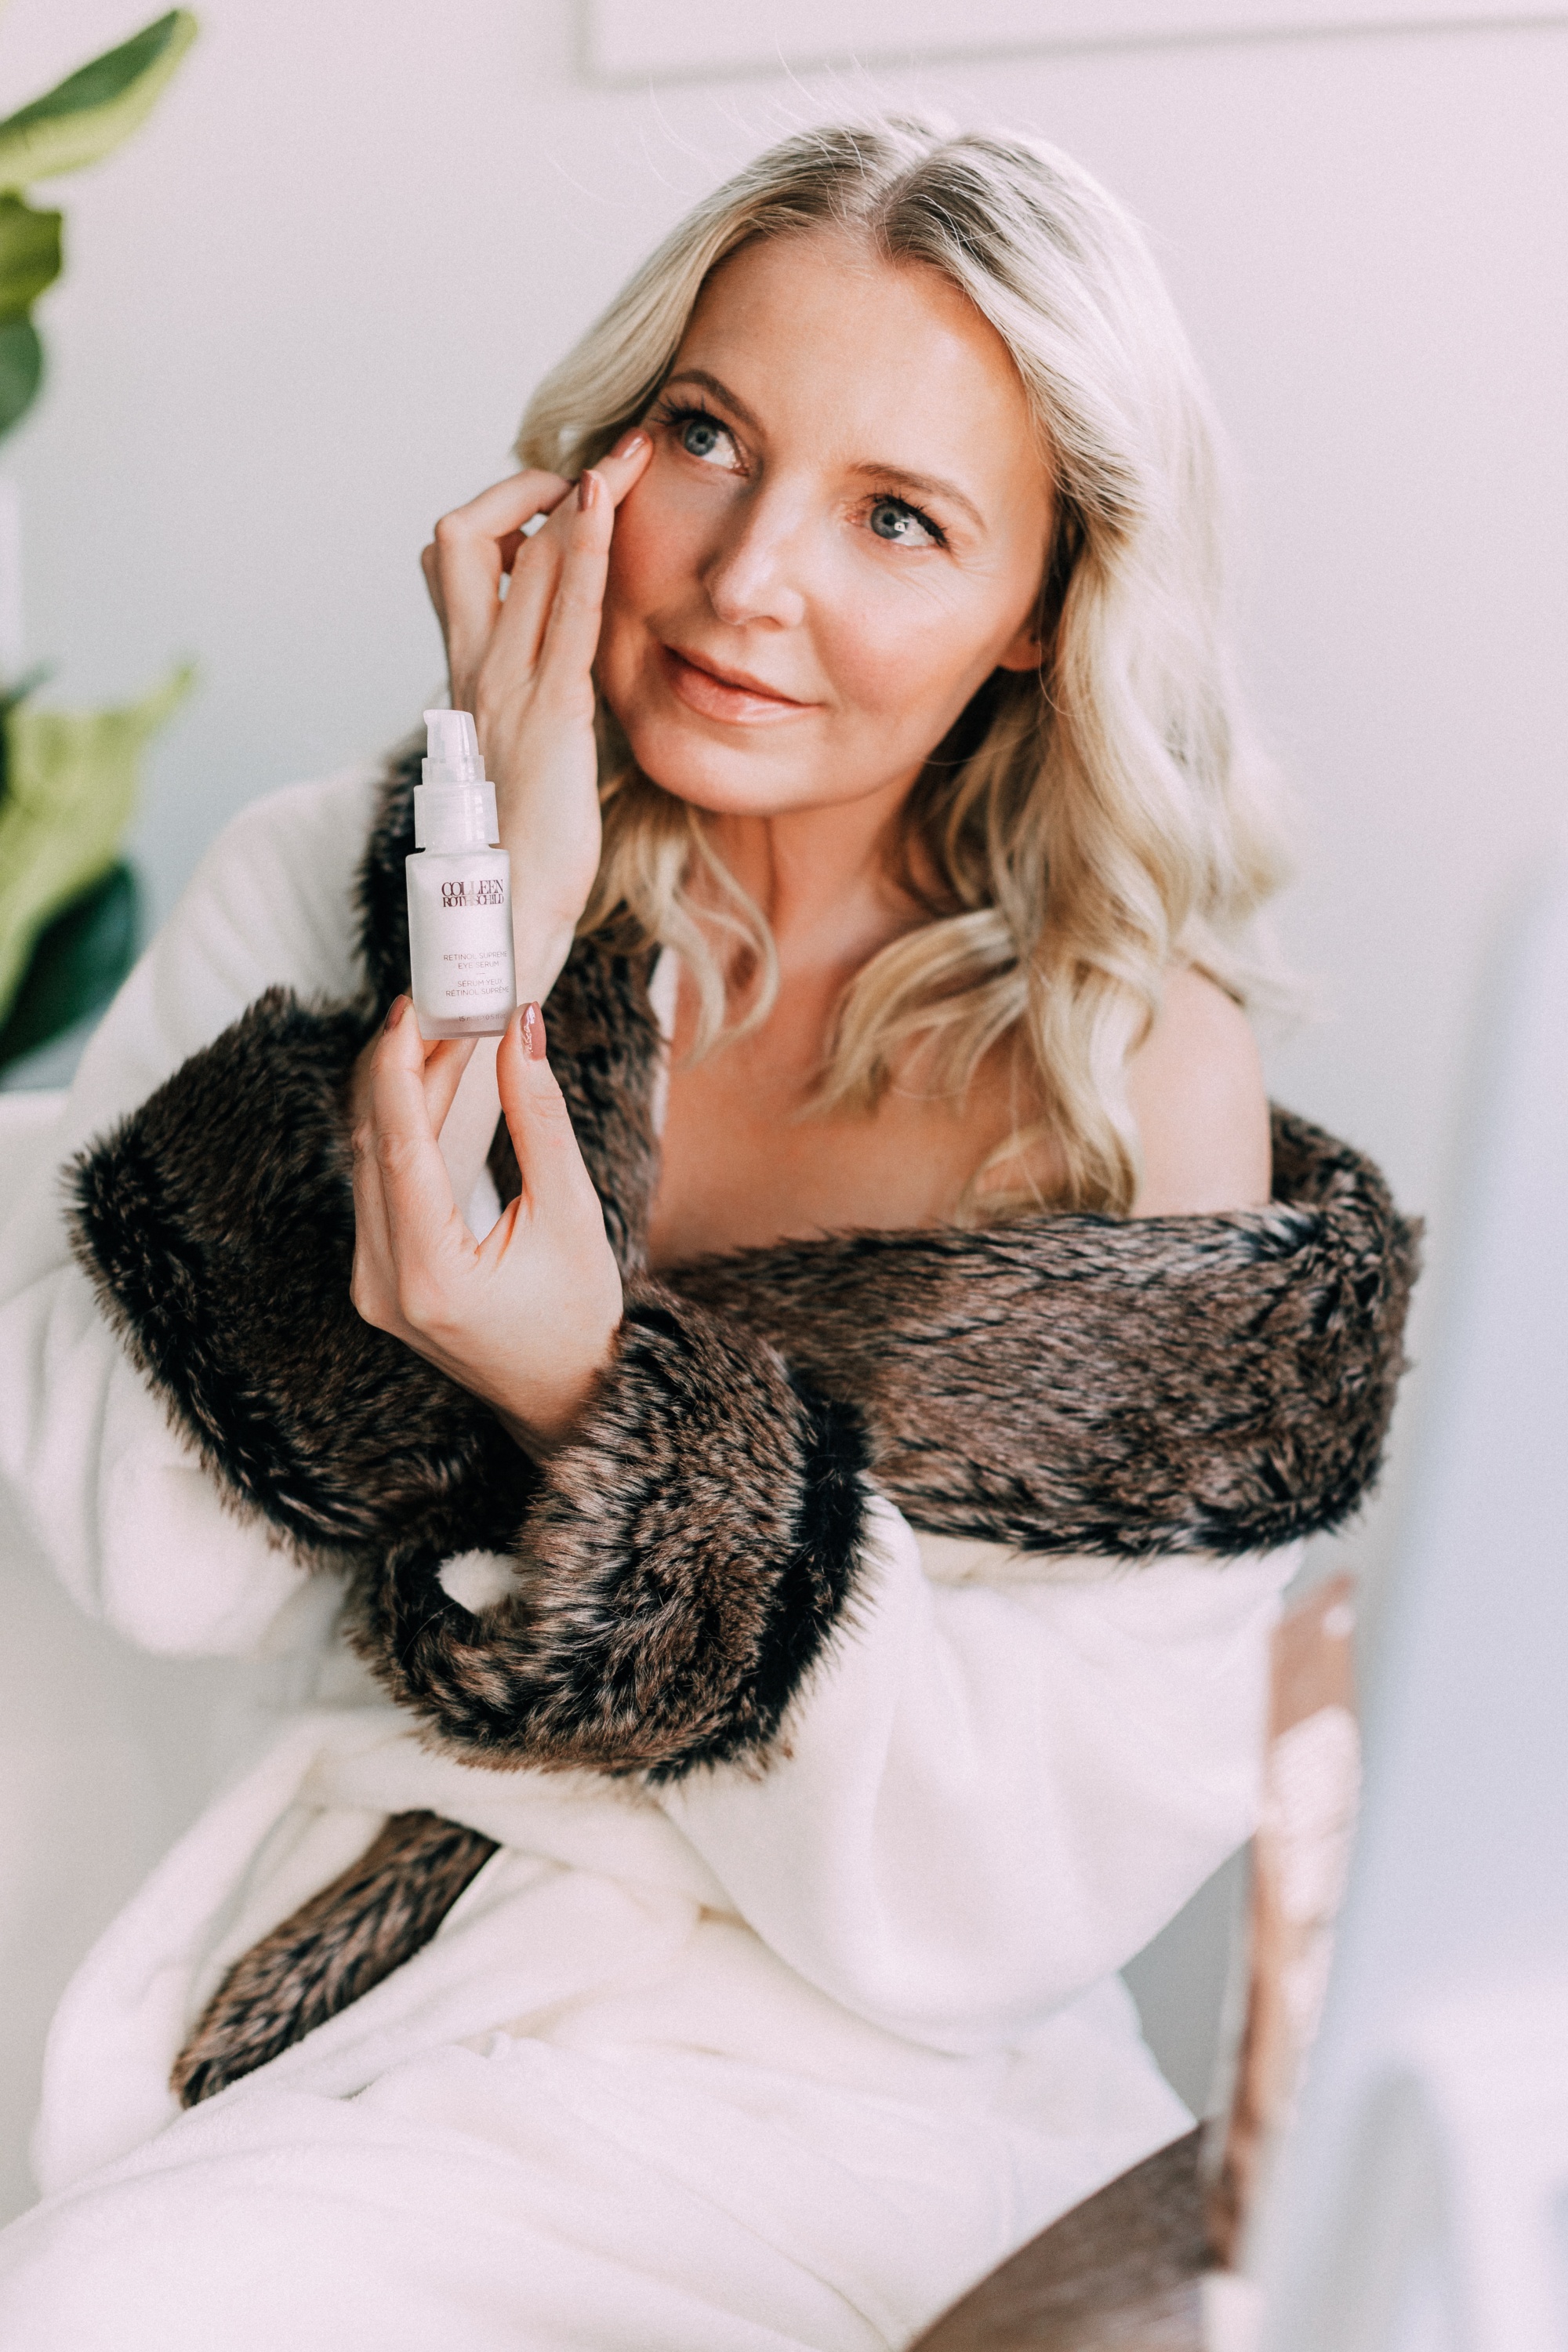 Hydrating skincare products for mature skin by Colleen Rothschild on beauty blogger over 40 Erin Busbee of busbeestyle.com